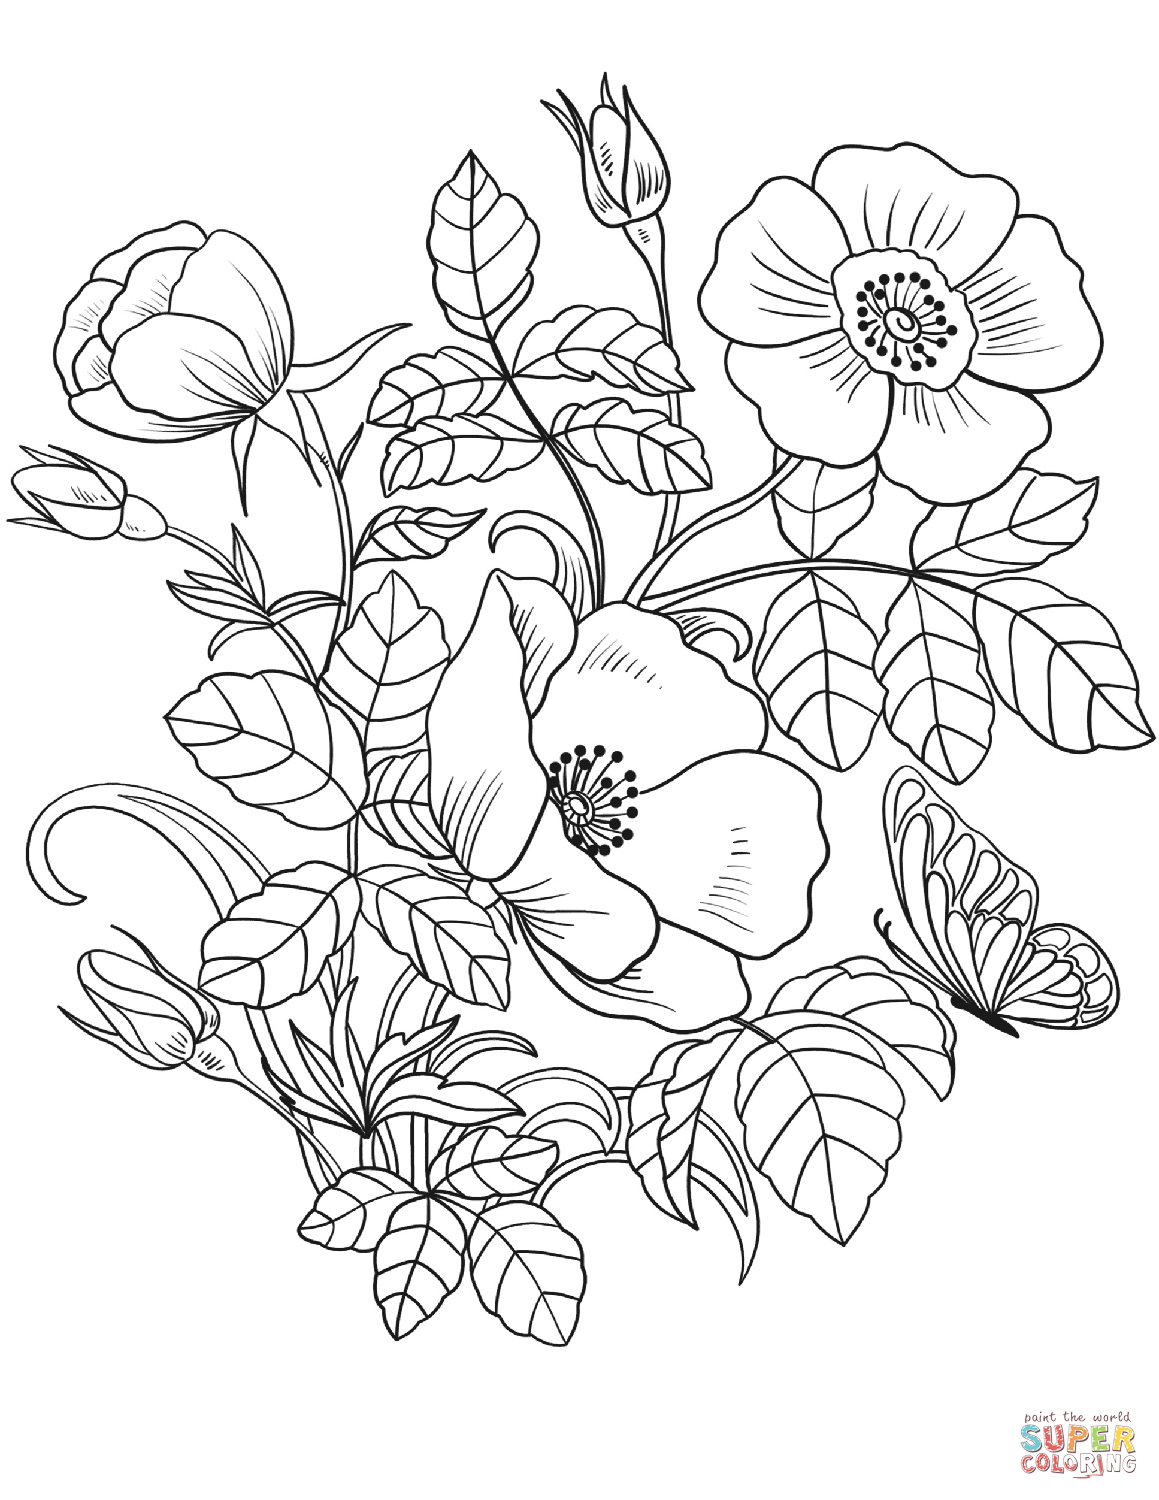 Spring Coloring Pages For Toddlers Spring Coloring Pages Free Coloring Pages